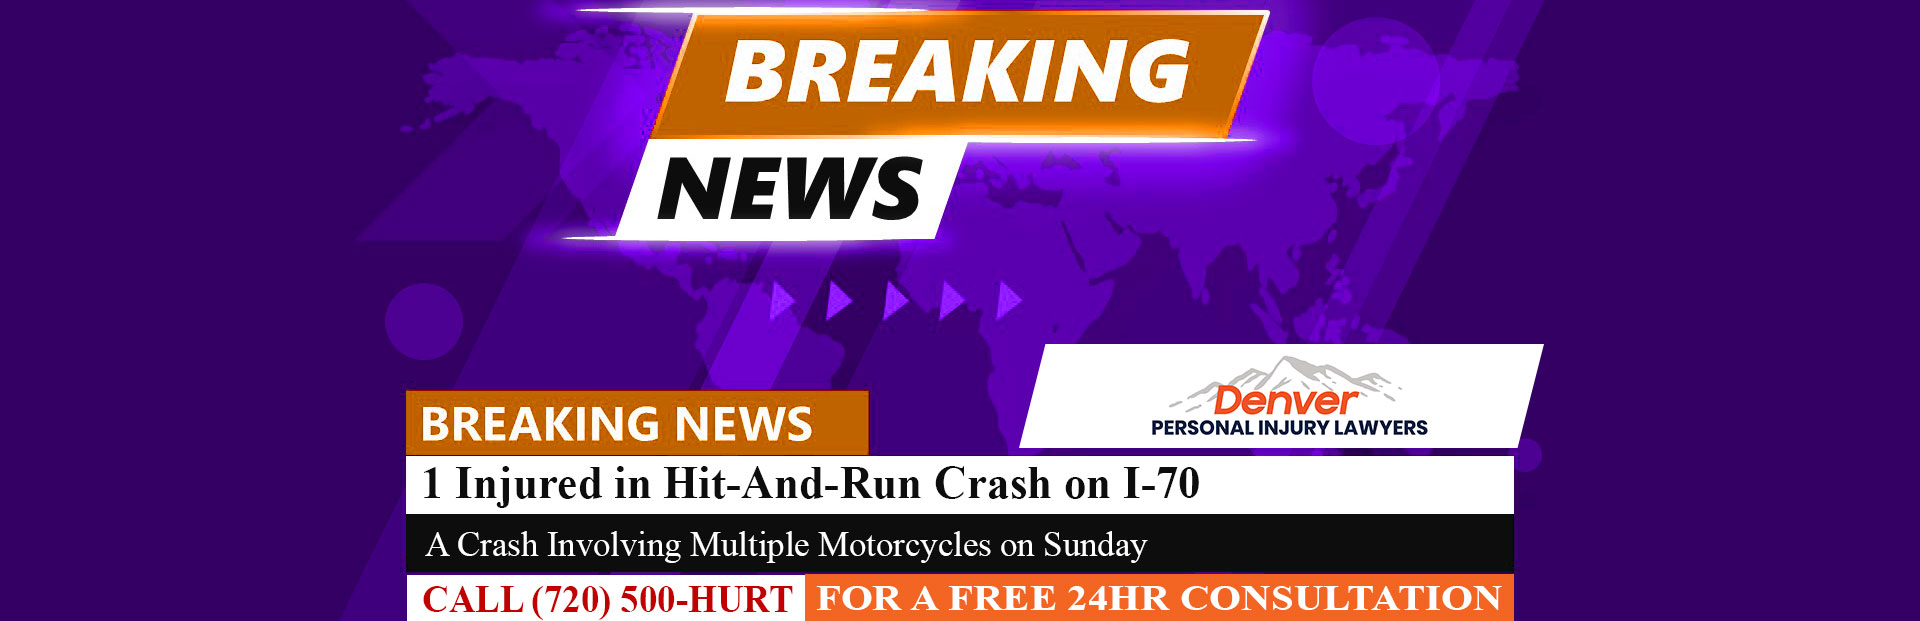 [05-03-23] 1 Injured in Hit-And-Run Crash Involving Multiple Motorcycles on I-70